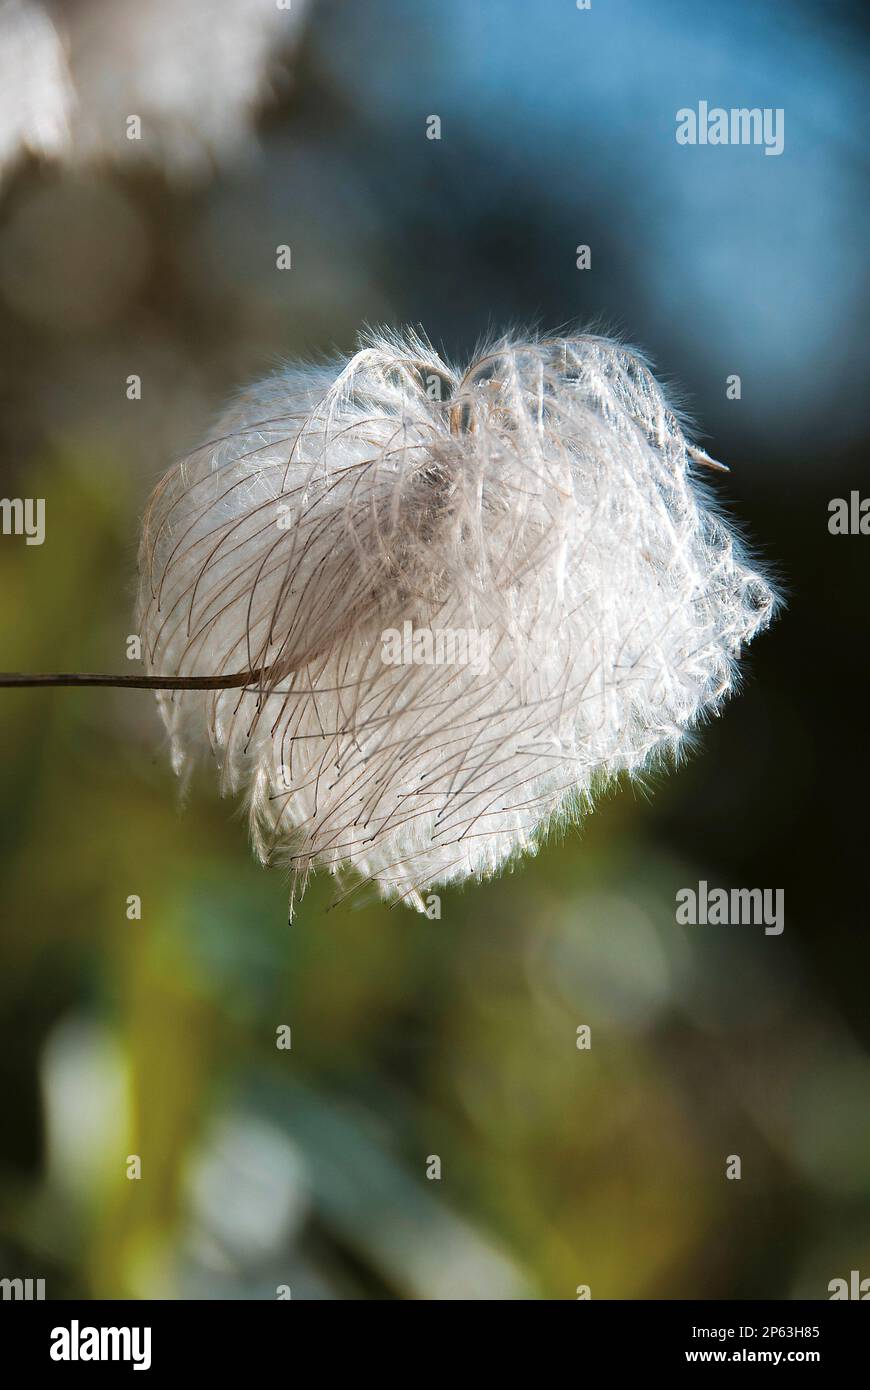 Clematis seed head in winter Stock Photo